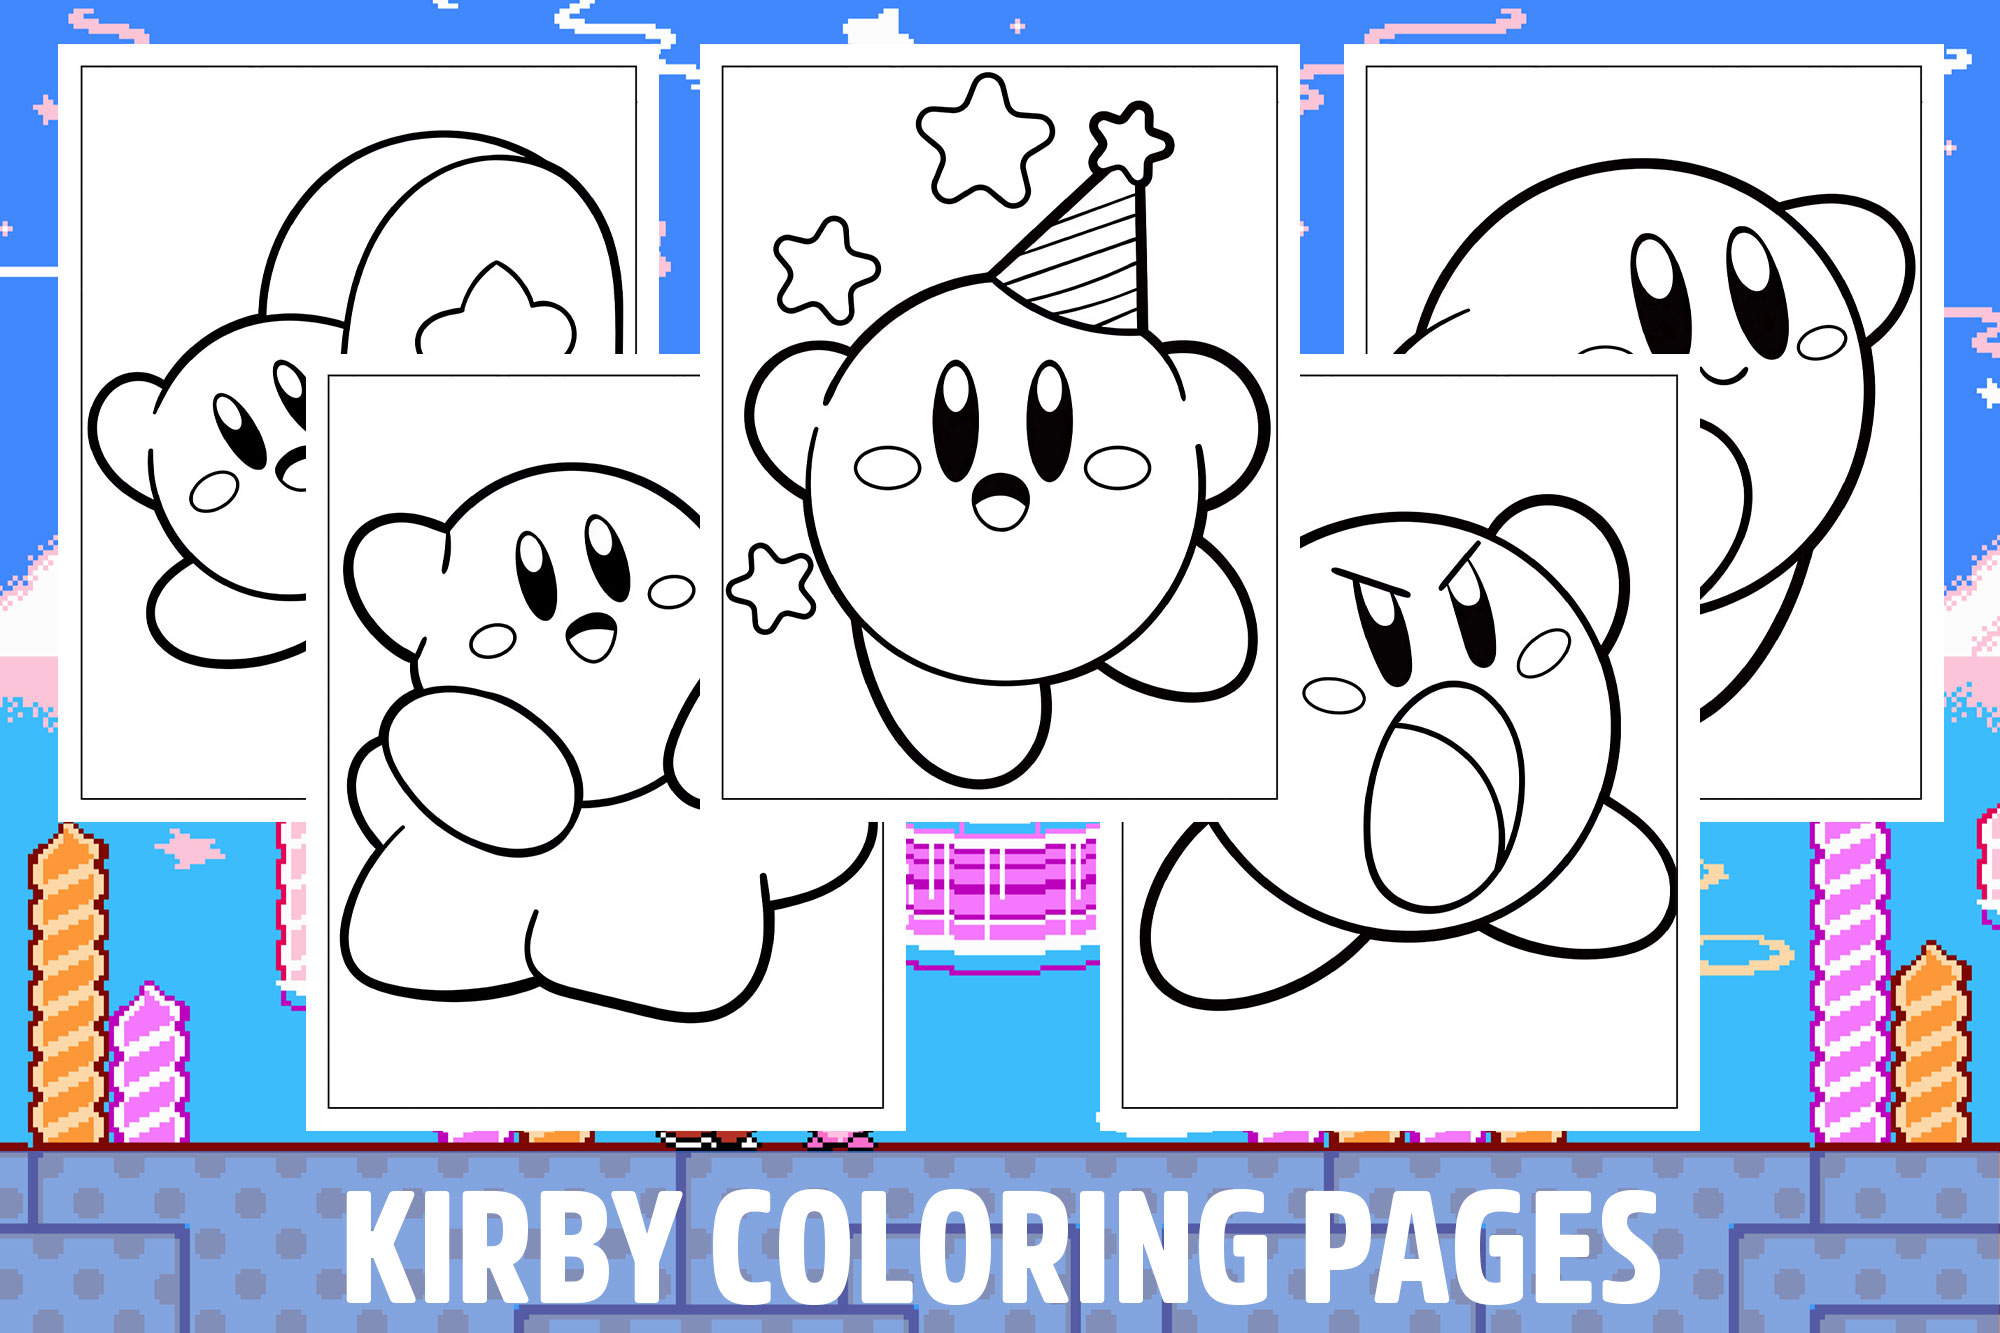 Kirby coloring pages for kids girls boys teens birthday school activity made by teachers